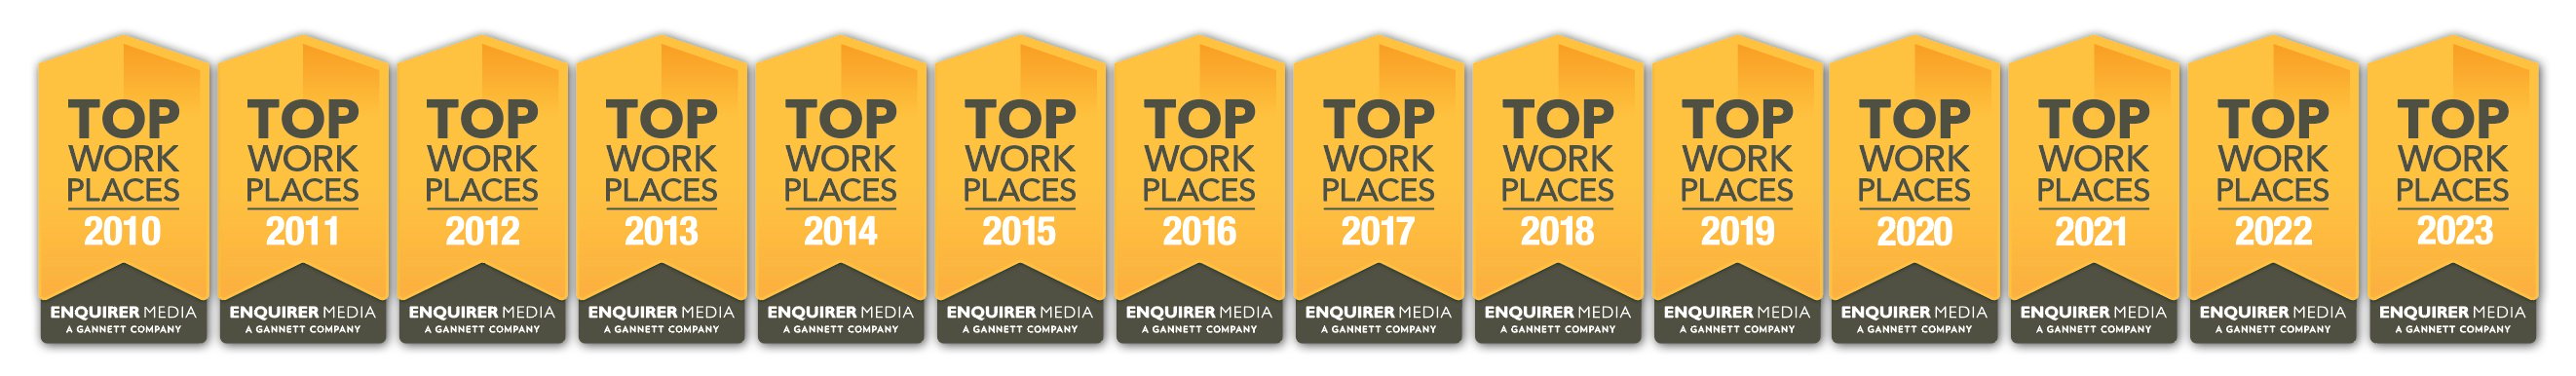 All 14 Top Workplaces awards